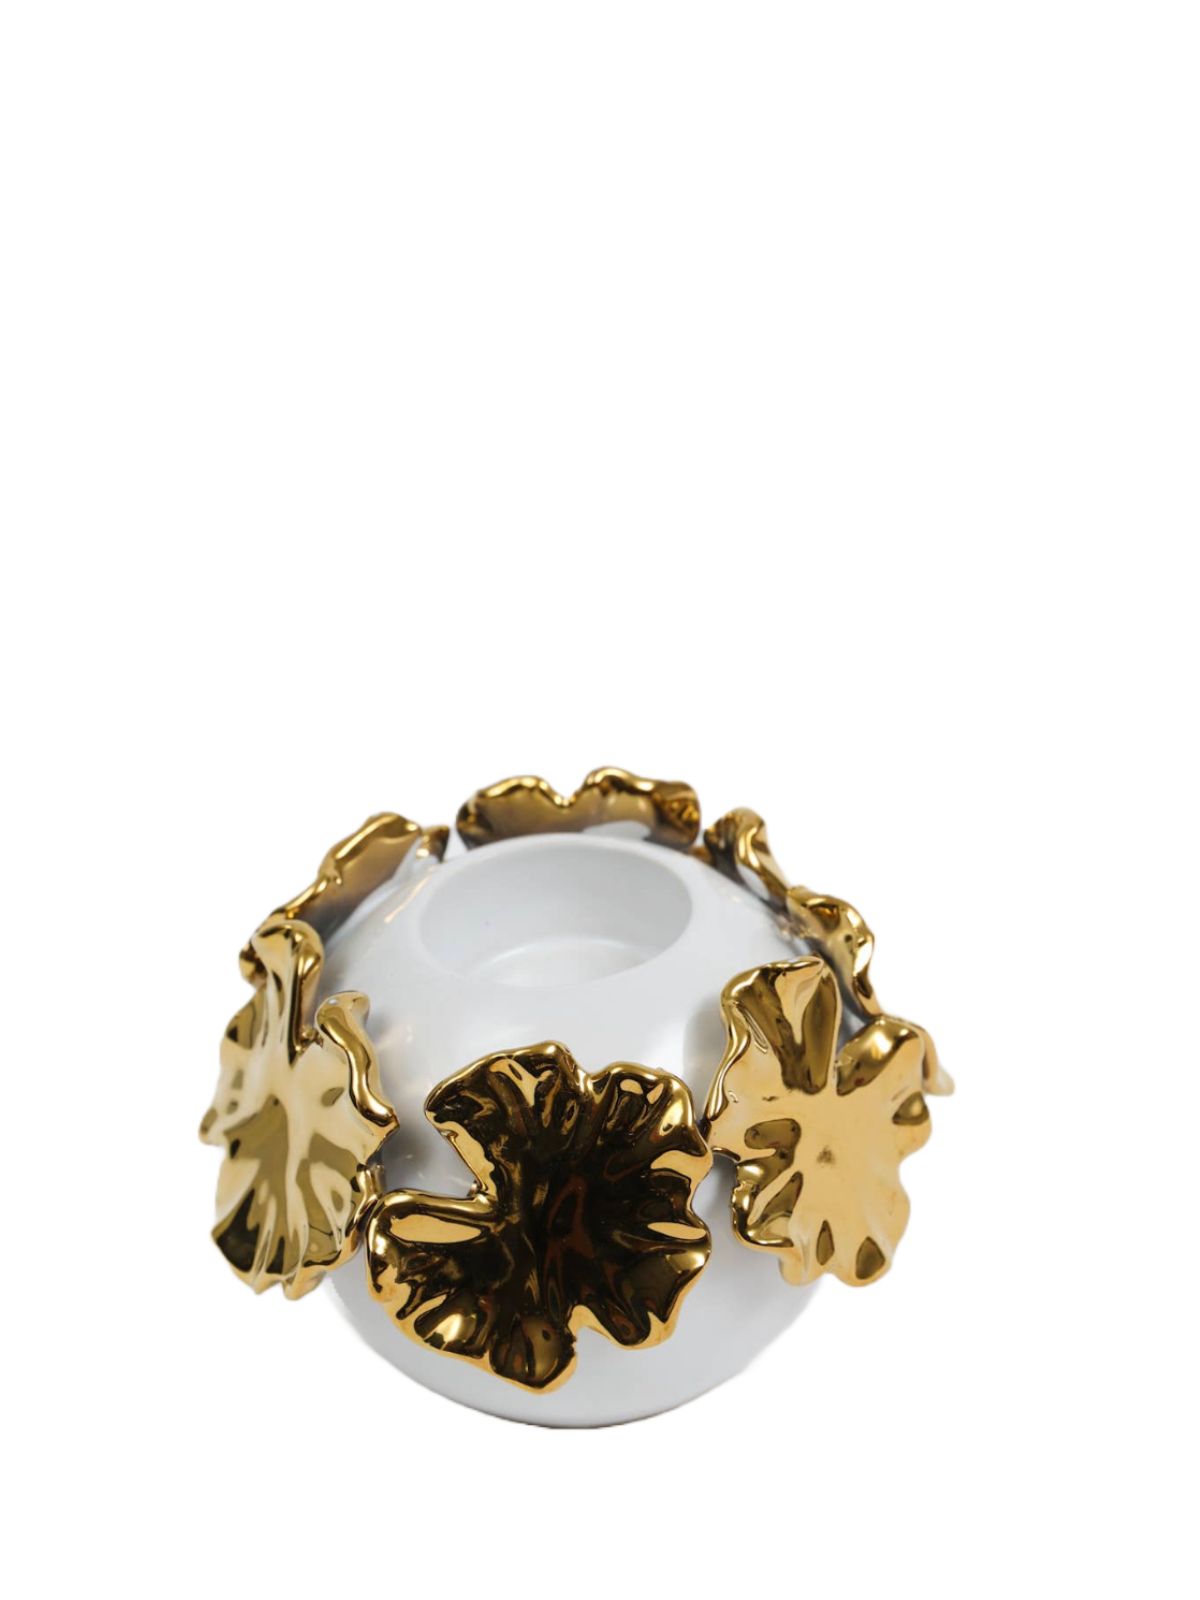 6 inch White Ceramic Tea Light Holders with Cascading Gold Floral Details, Sold by KYA Home Decor.